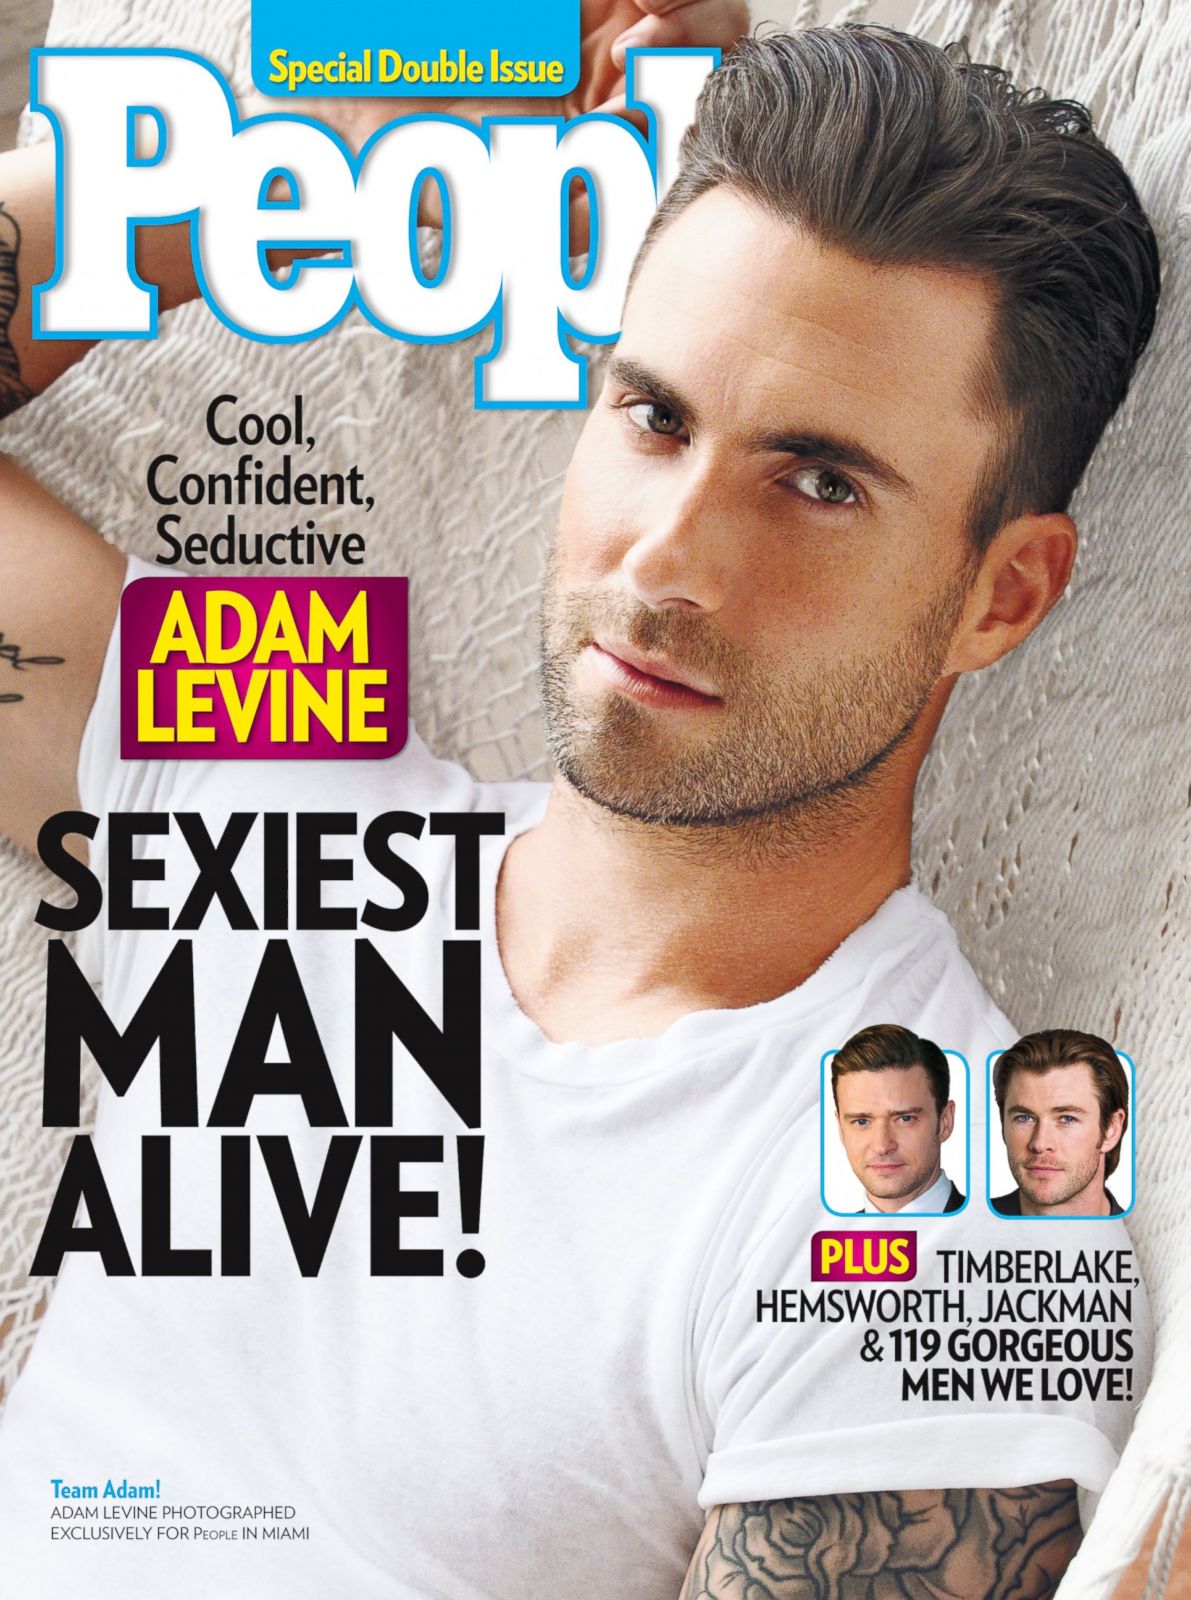 All of the Sexiest Man Alive People Magazine Covers